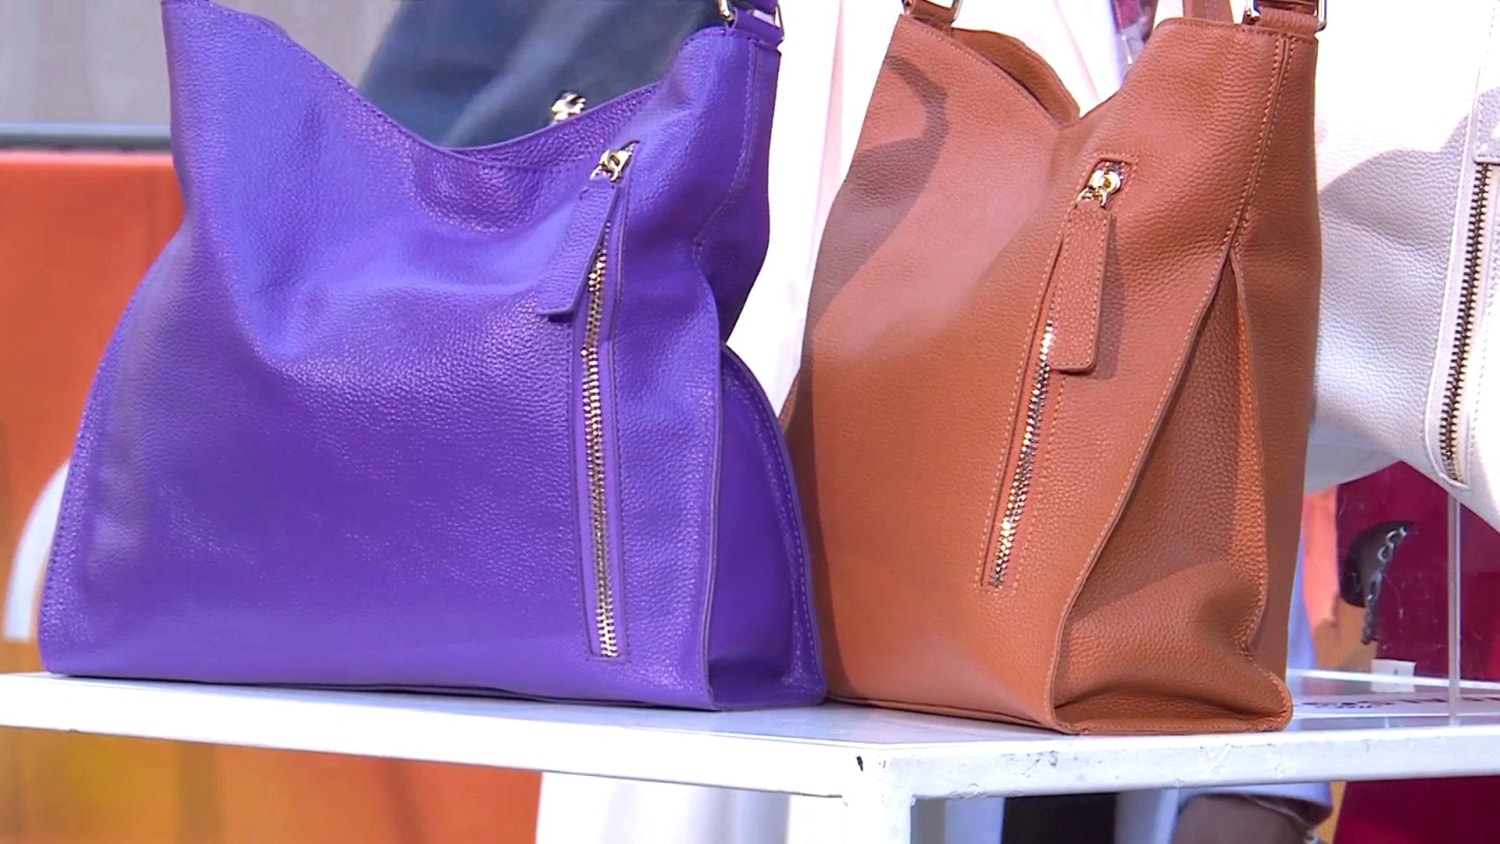 Law Against Buying Fake Handbags Gets Another Push - Gothamist